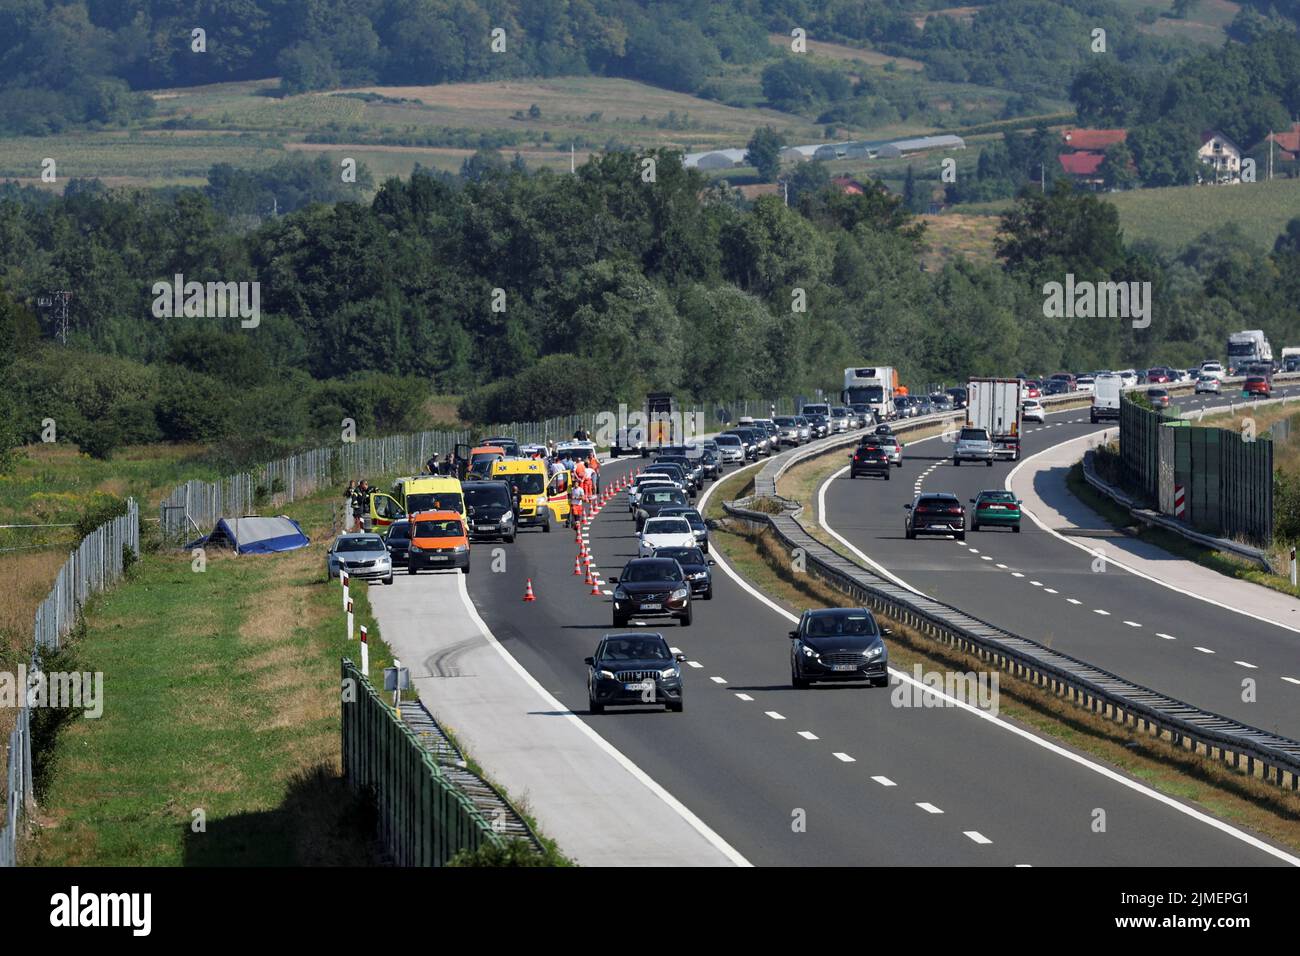 Rescuers work at the scene where a bus with Polish licence plates slipped off a road near Varazdin, northwestern Croatia, August 6, 2022. REUTERS/Antonio Bronic Stock Photo